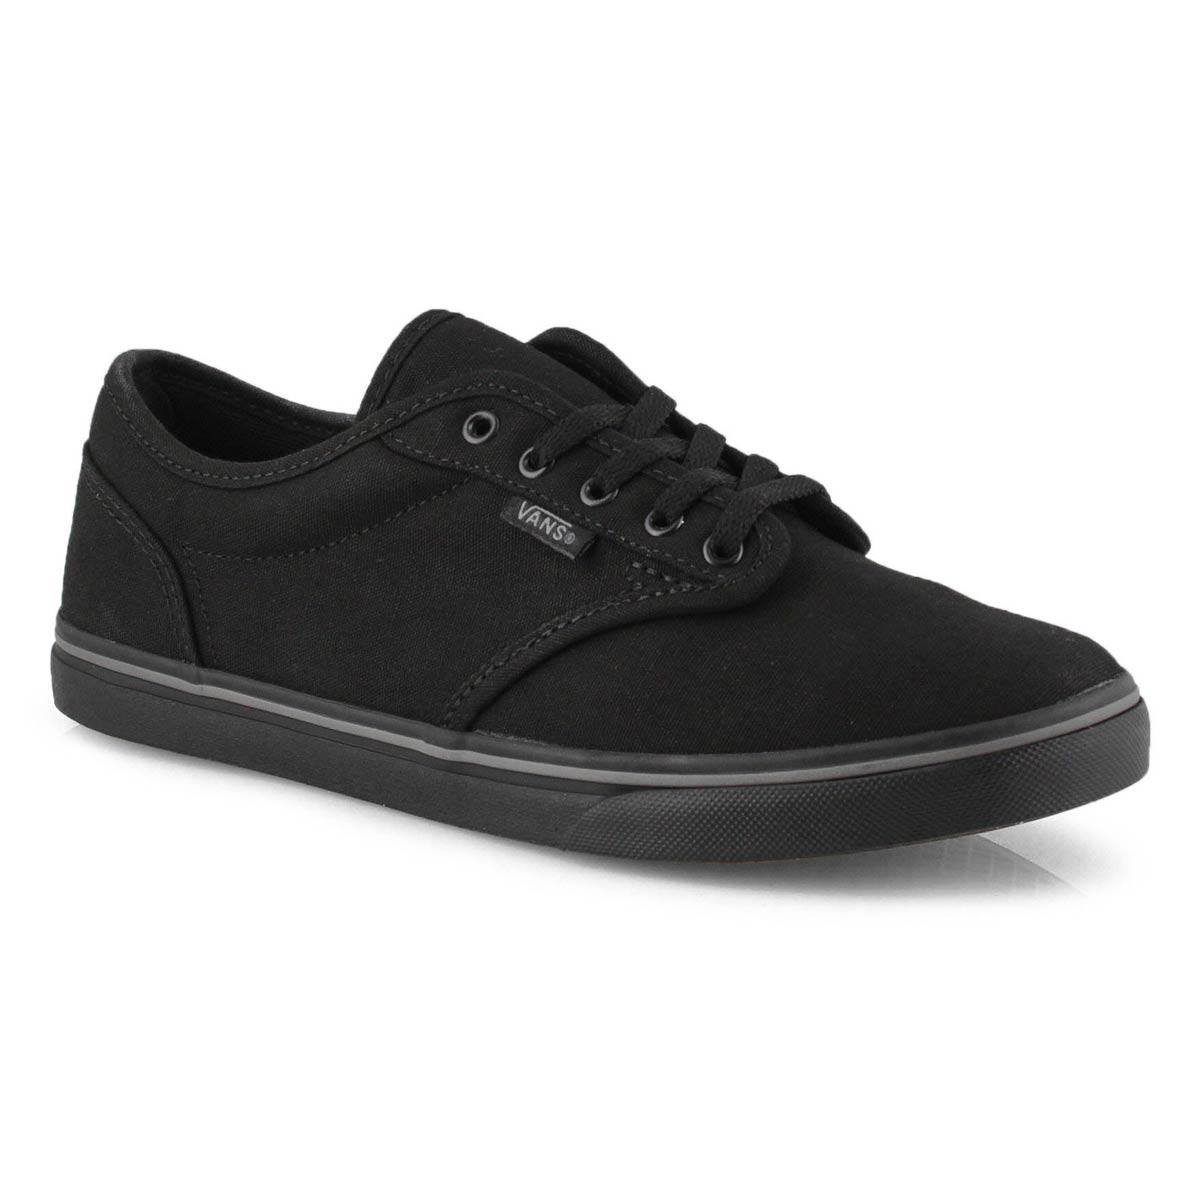 vans atwood low black and white